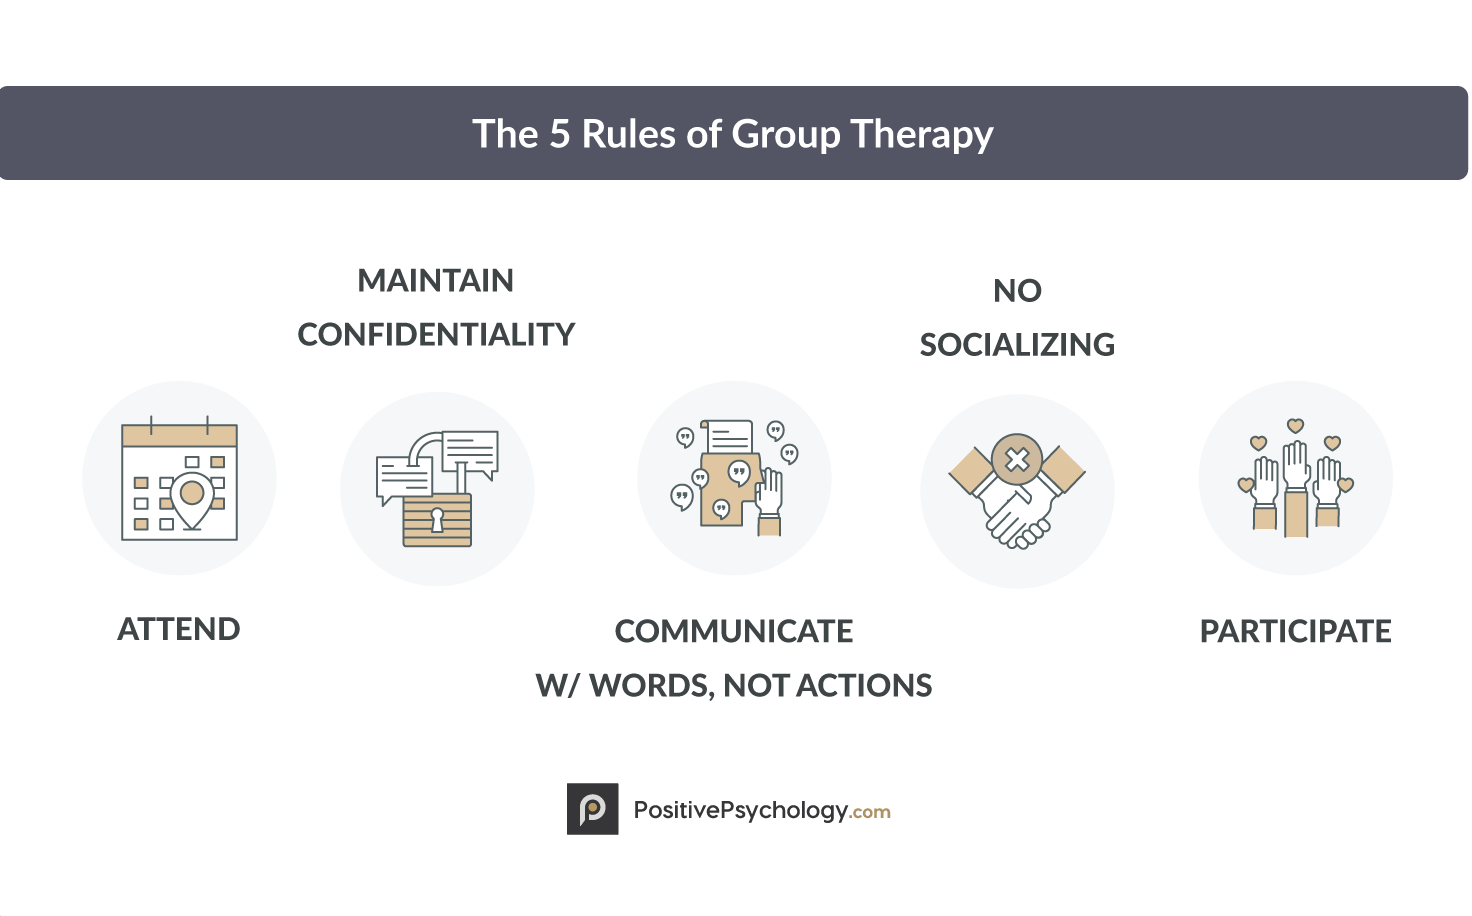 The 5 Rules of Group Therapy